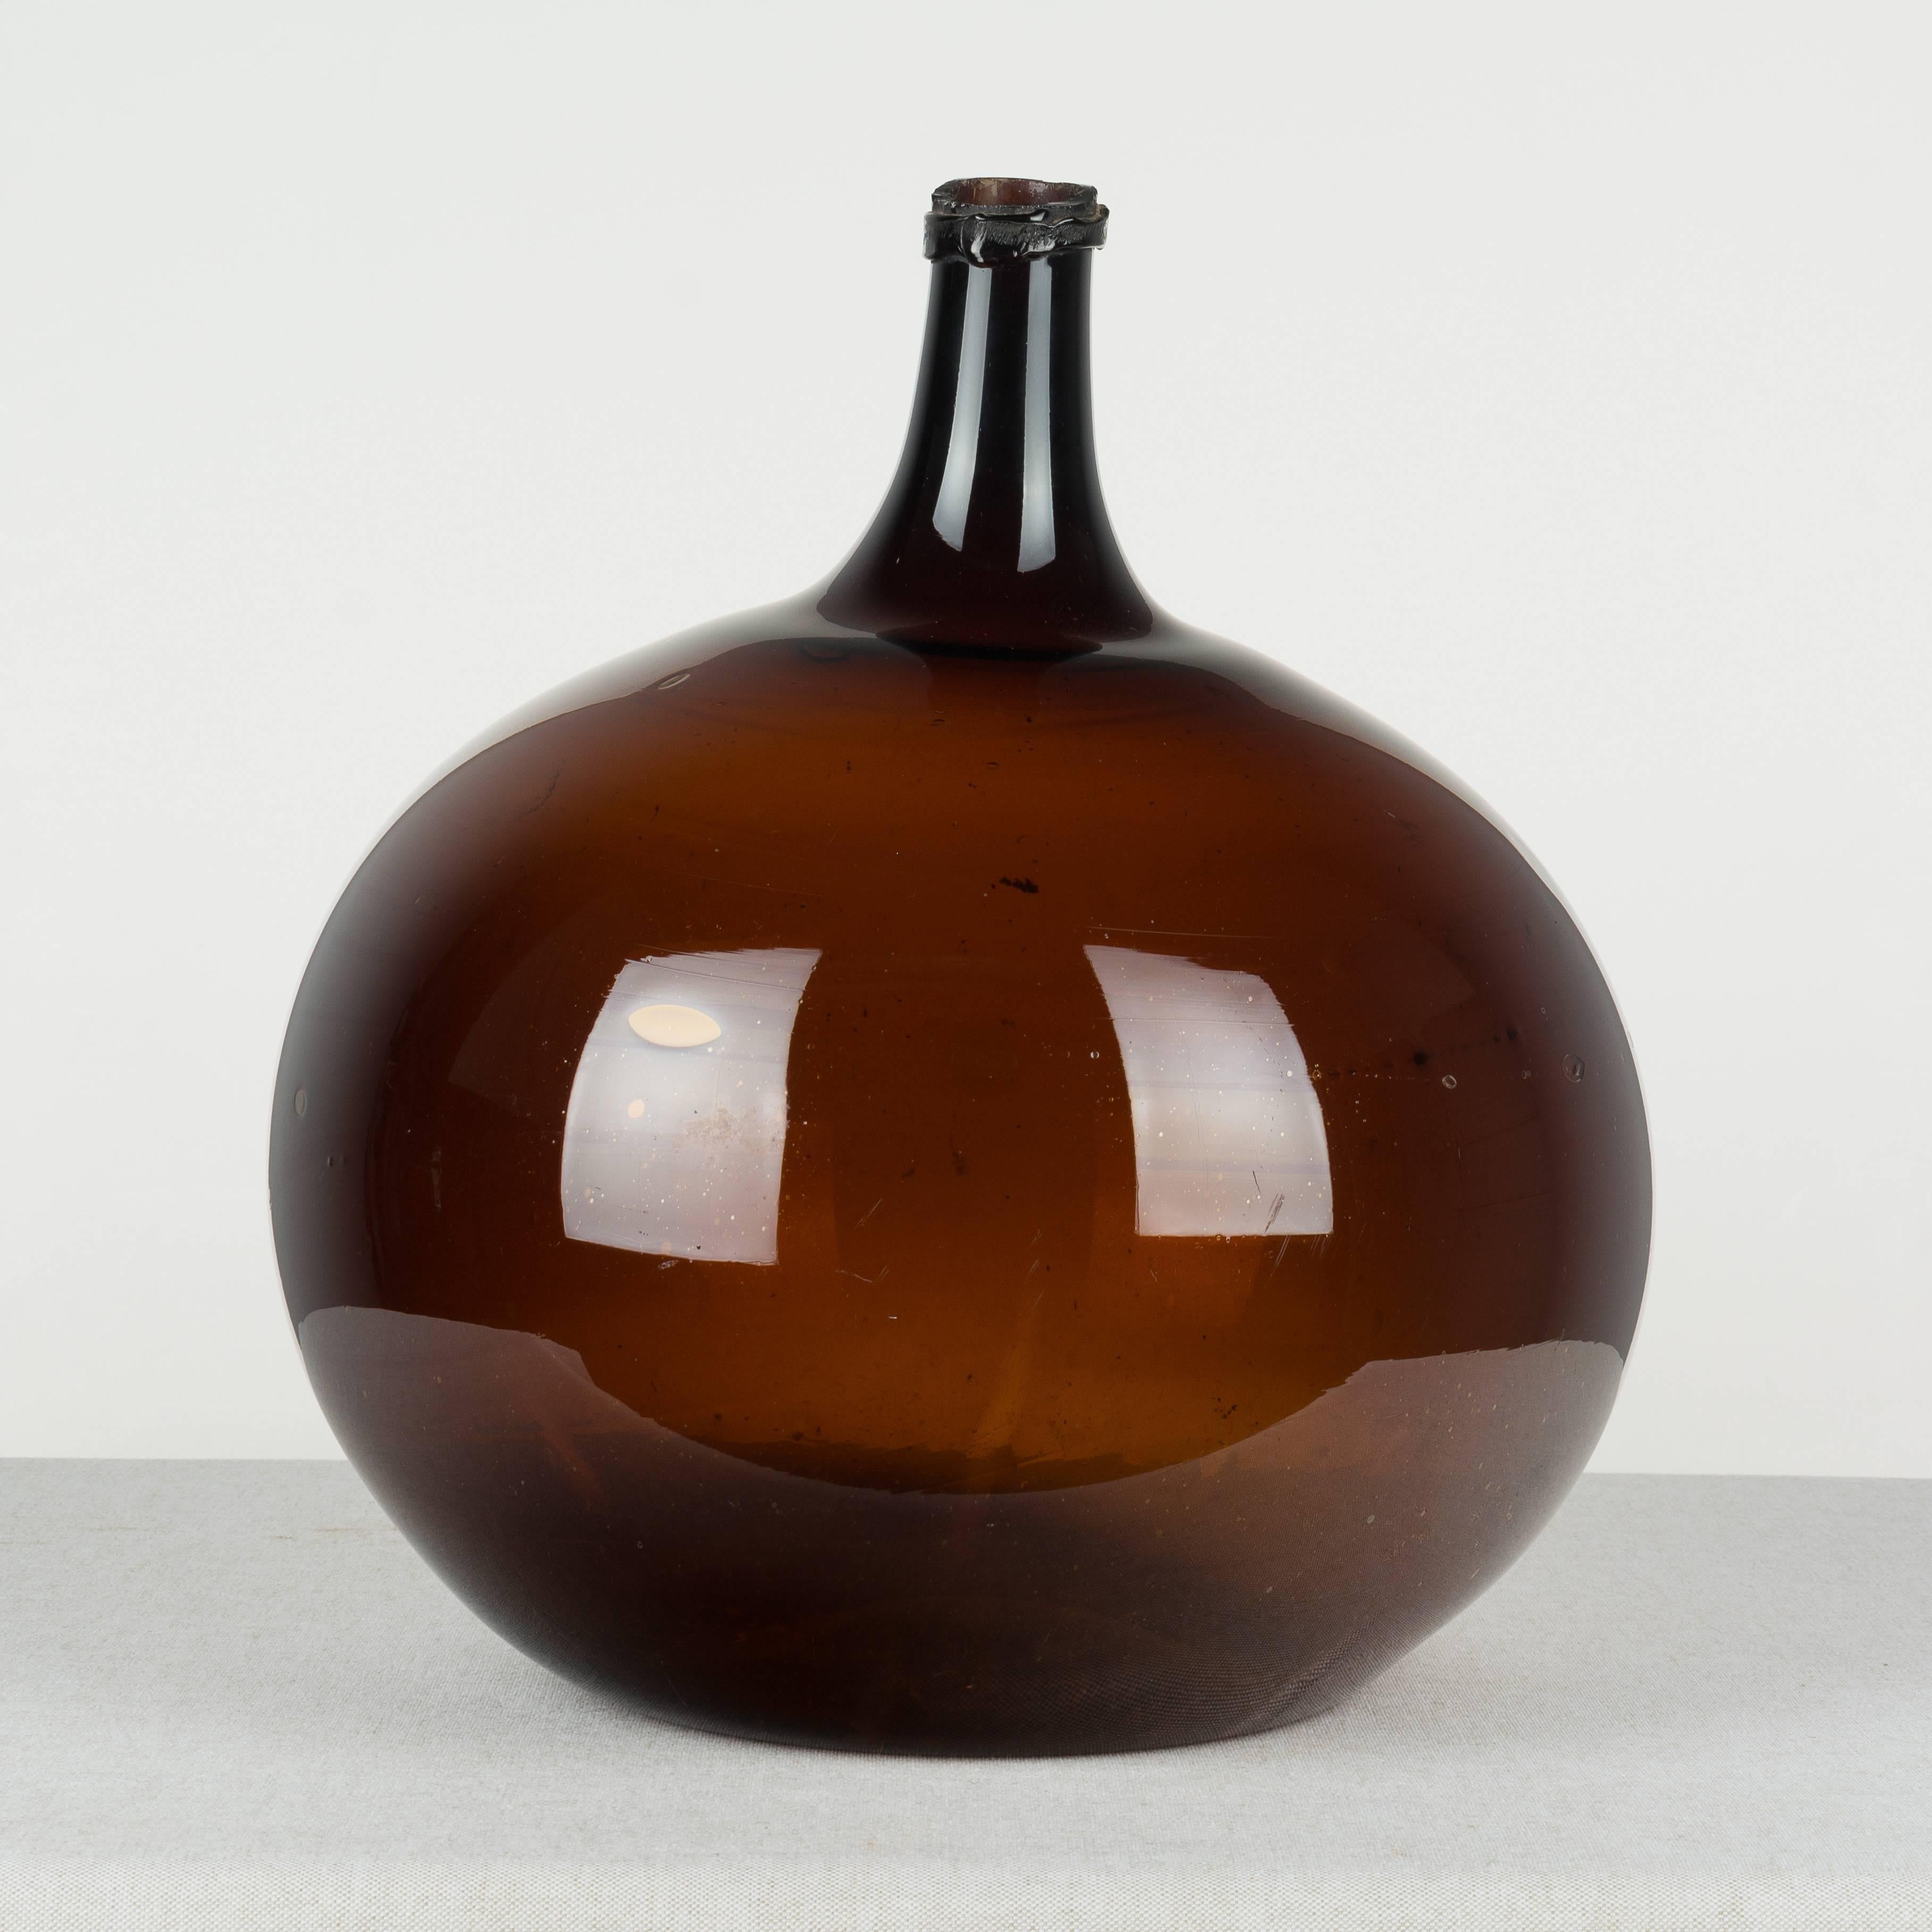 A large 19th century French globular form amber demijohn bottle with air bubbles typical of handblown glass. Please refer to photos for more details. We have a large selection of French antiques at Olivier Fleury, Inc.  Please visit our showroom in